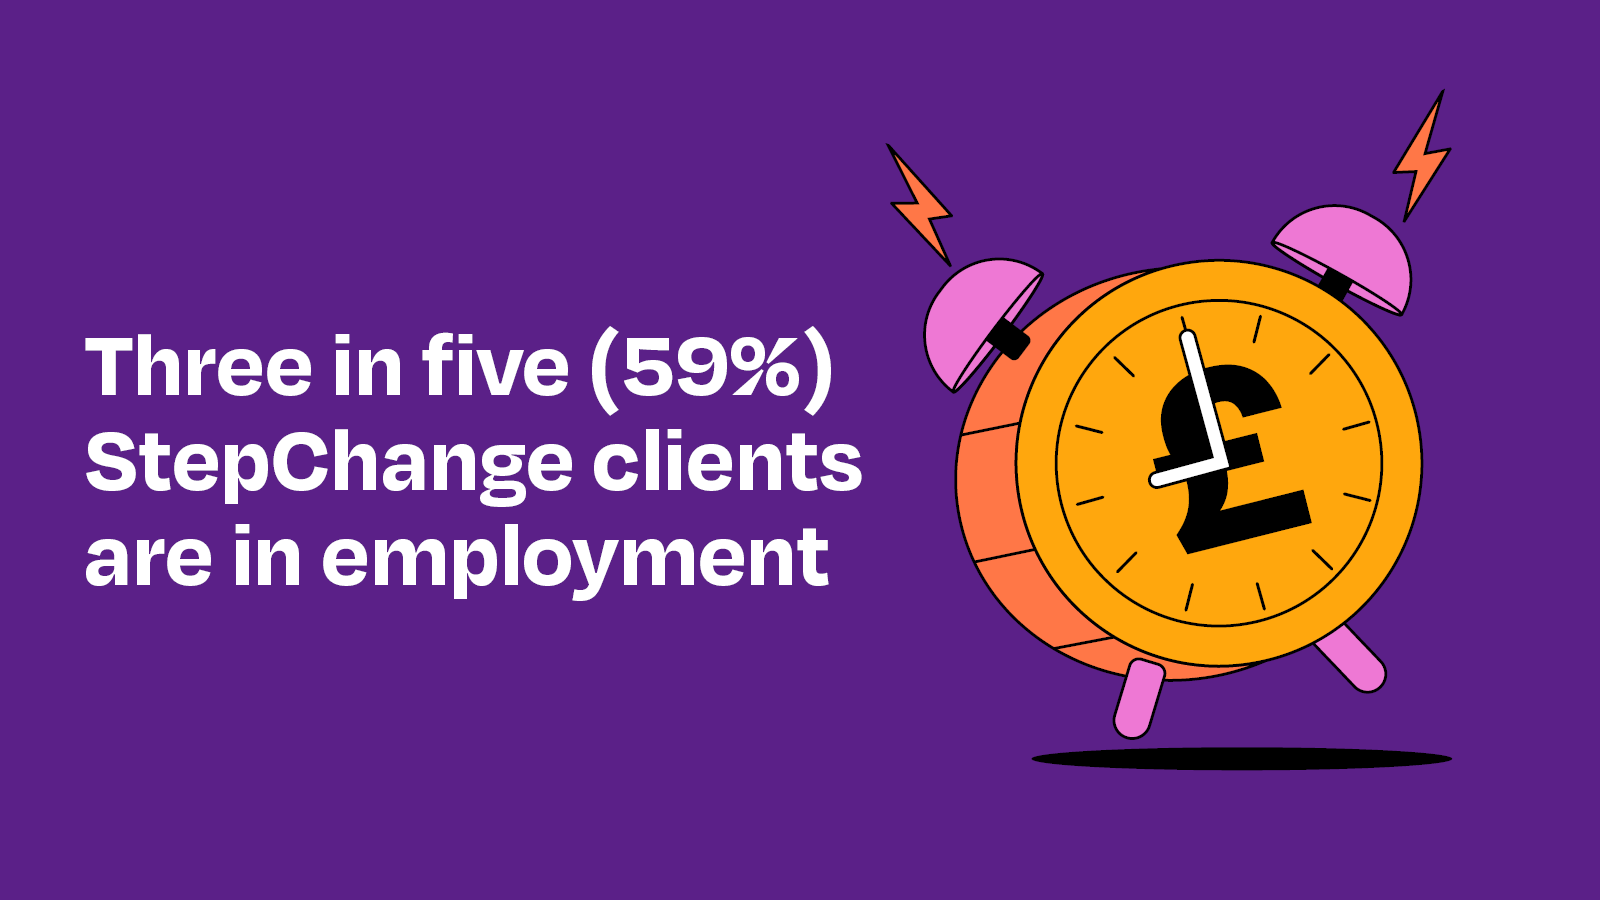 Majority of clients are in employment